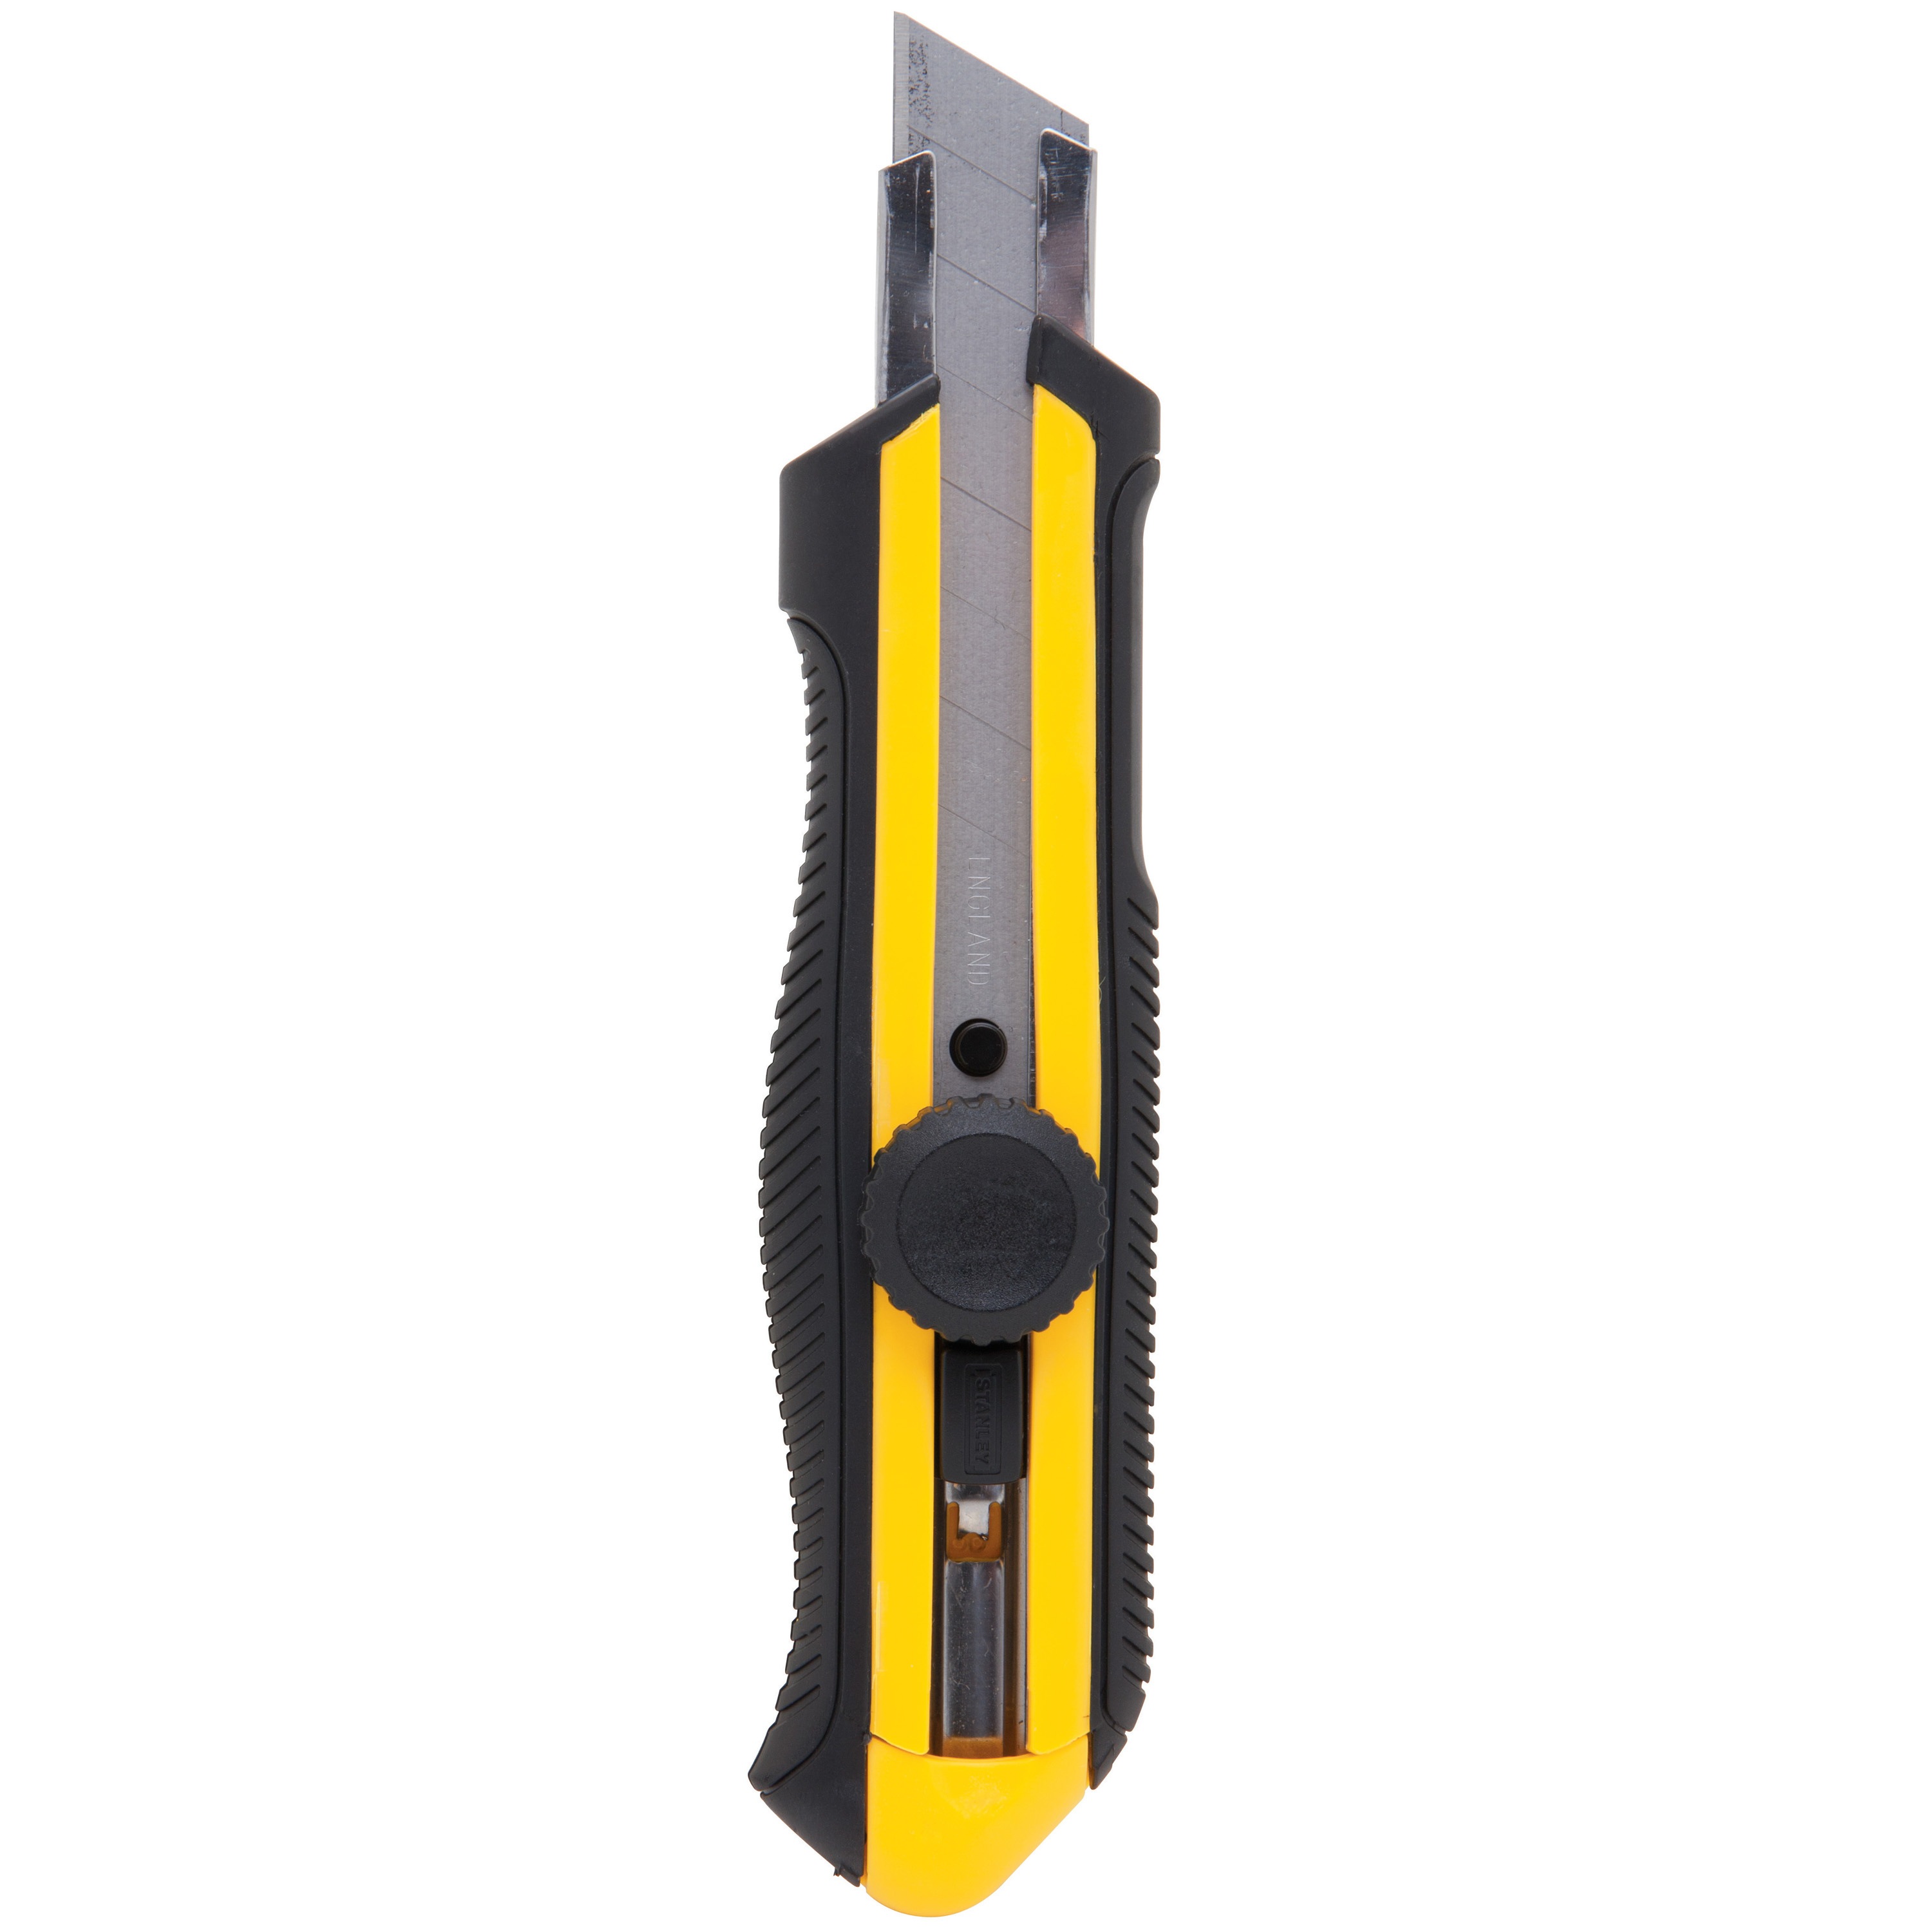 Stanley Tools - 18mm Dynagrip SnapOff Knife - 10-418